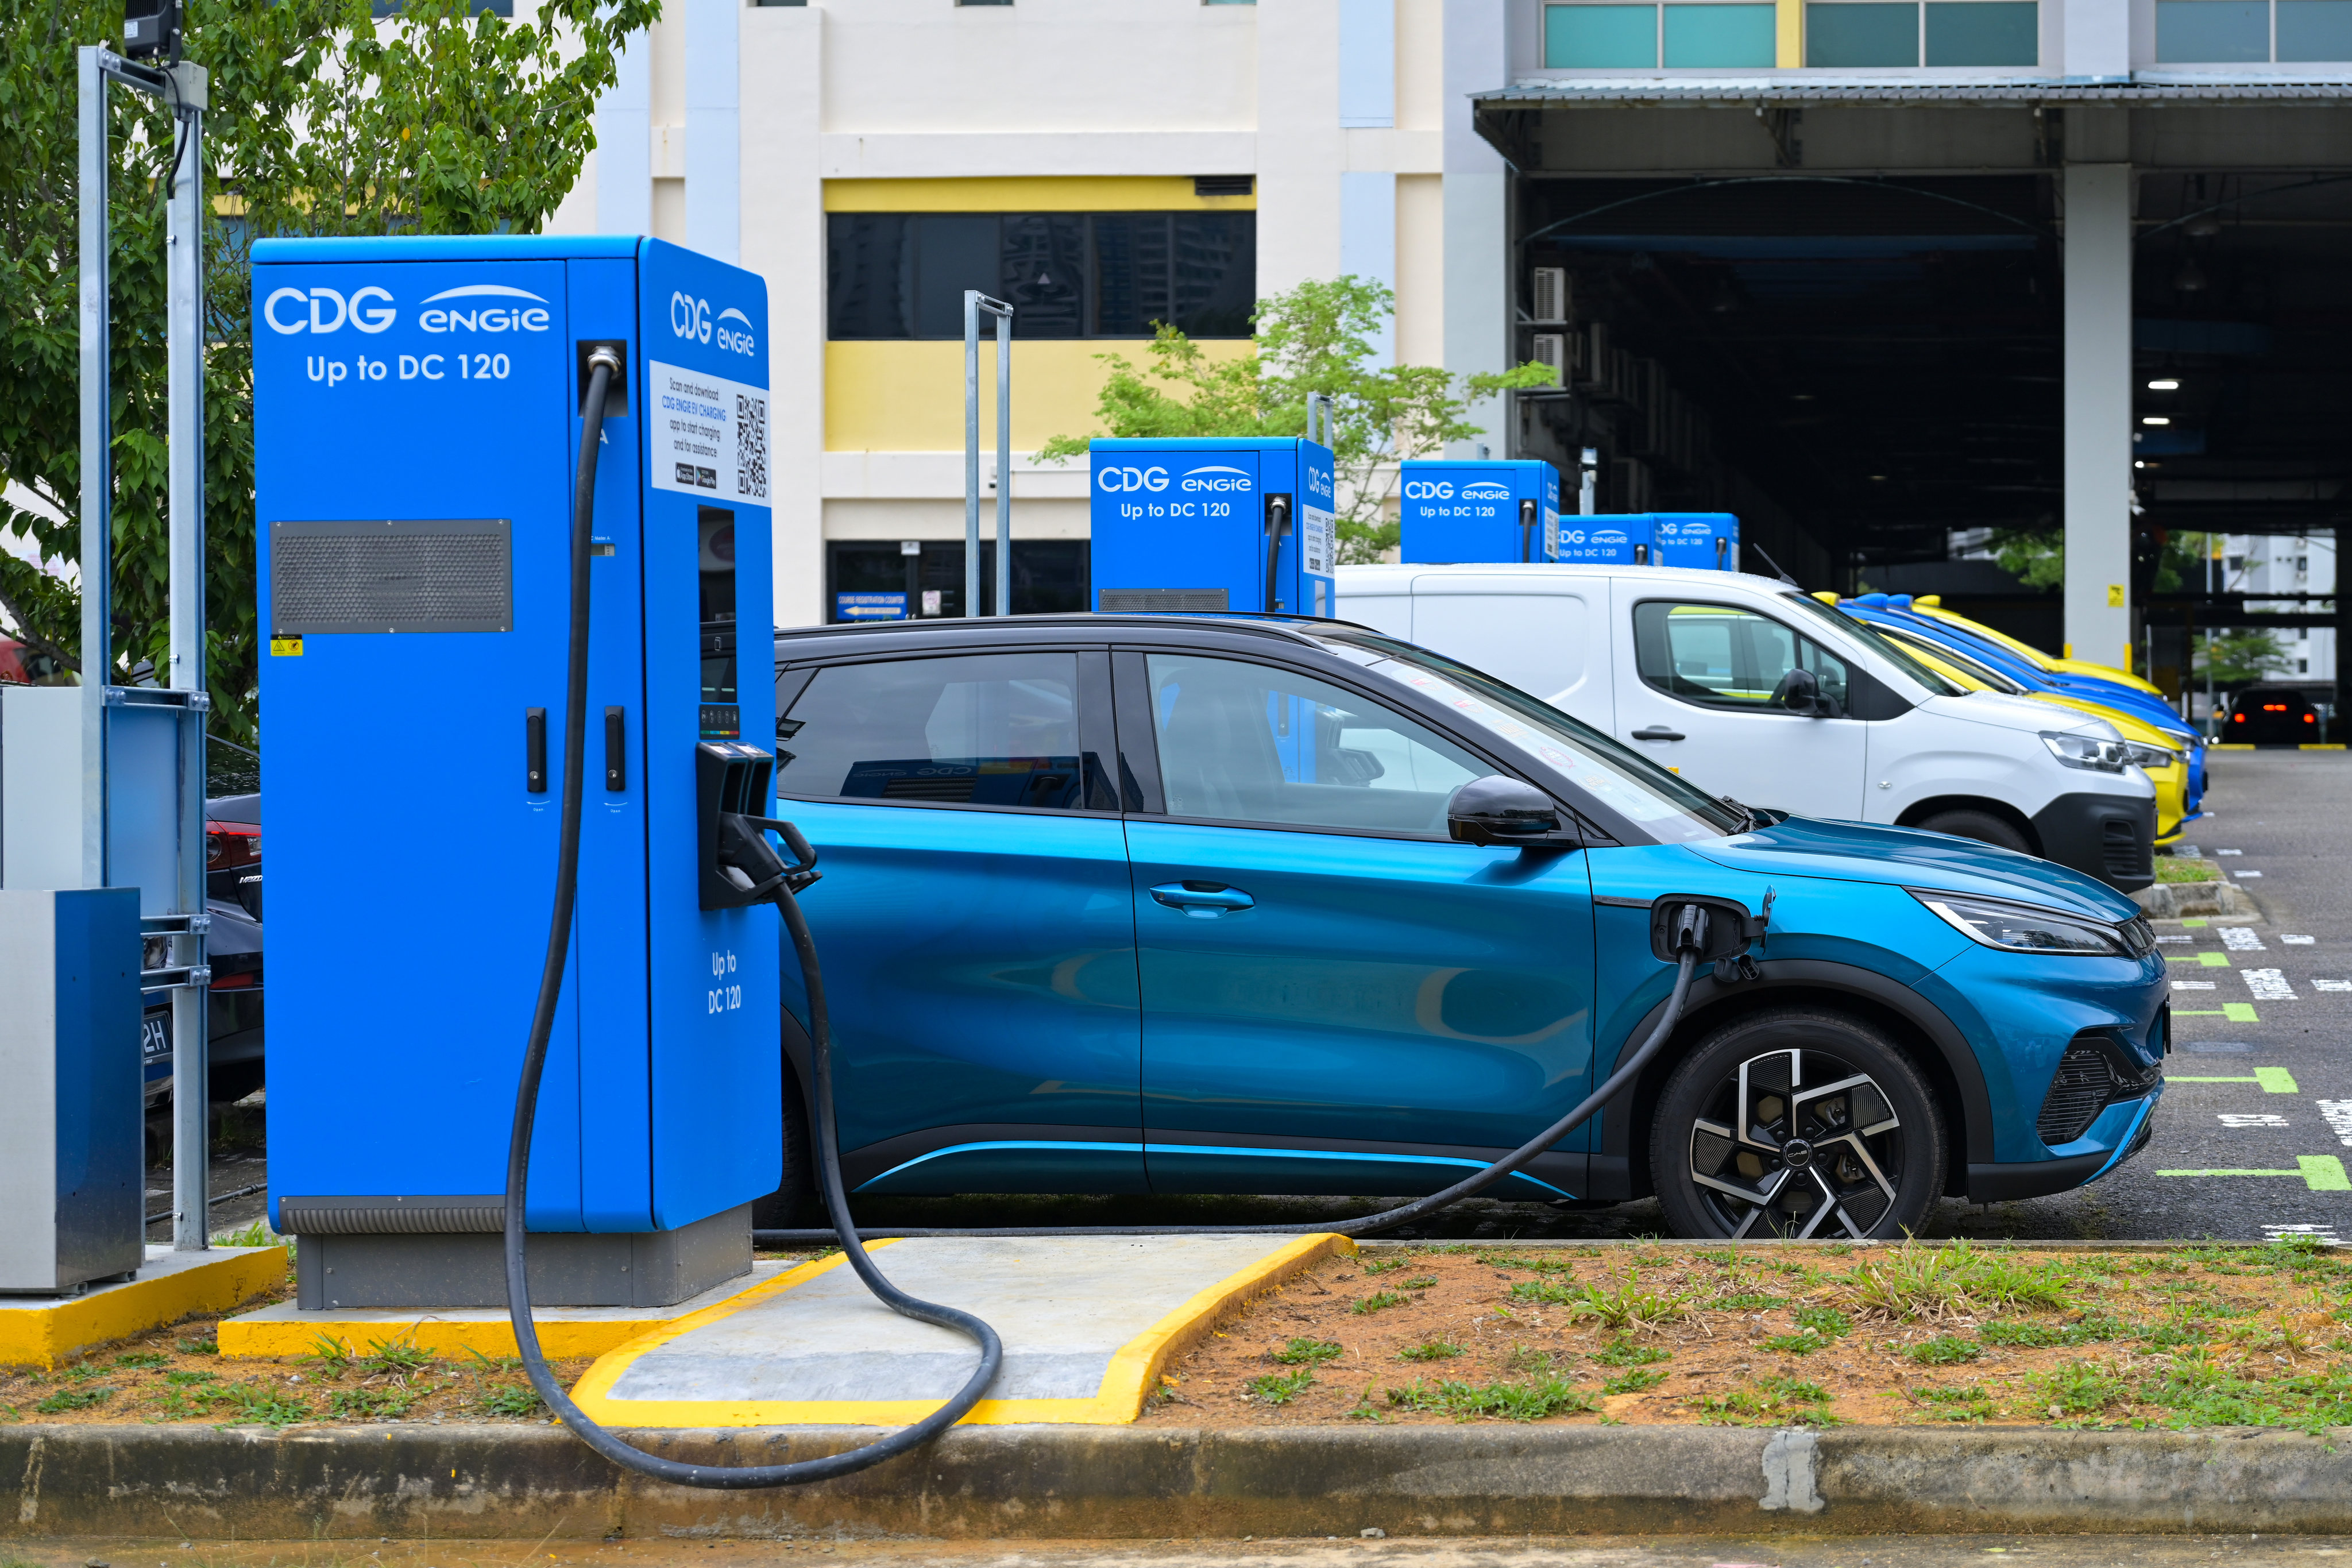 Singapore’s Green Plan 2030 means converting all public and private transport to electric vehicles so the government is working with the private sector to prompt infrastructure investment in fast-charging points such as these. Photo: Handout